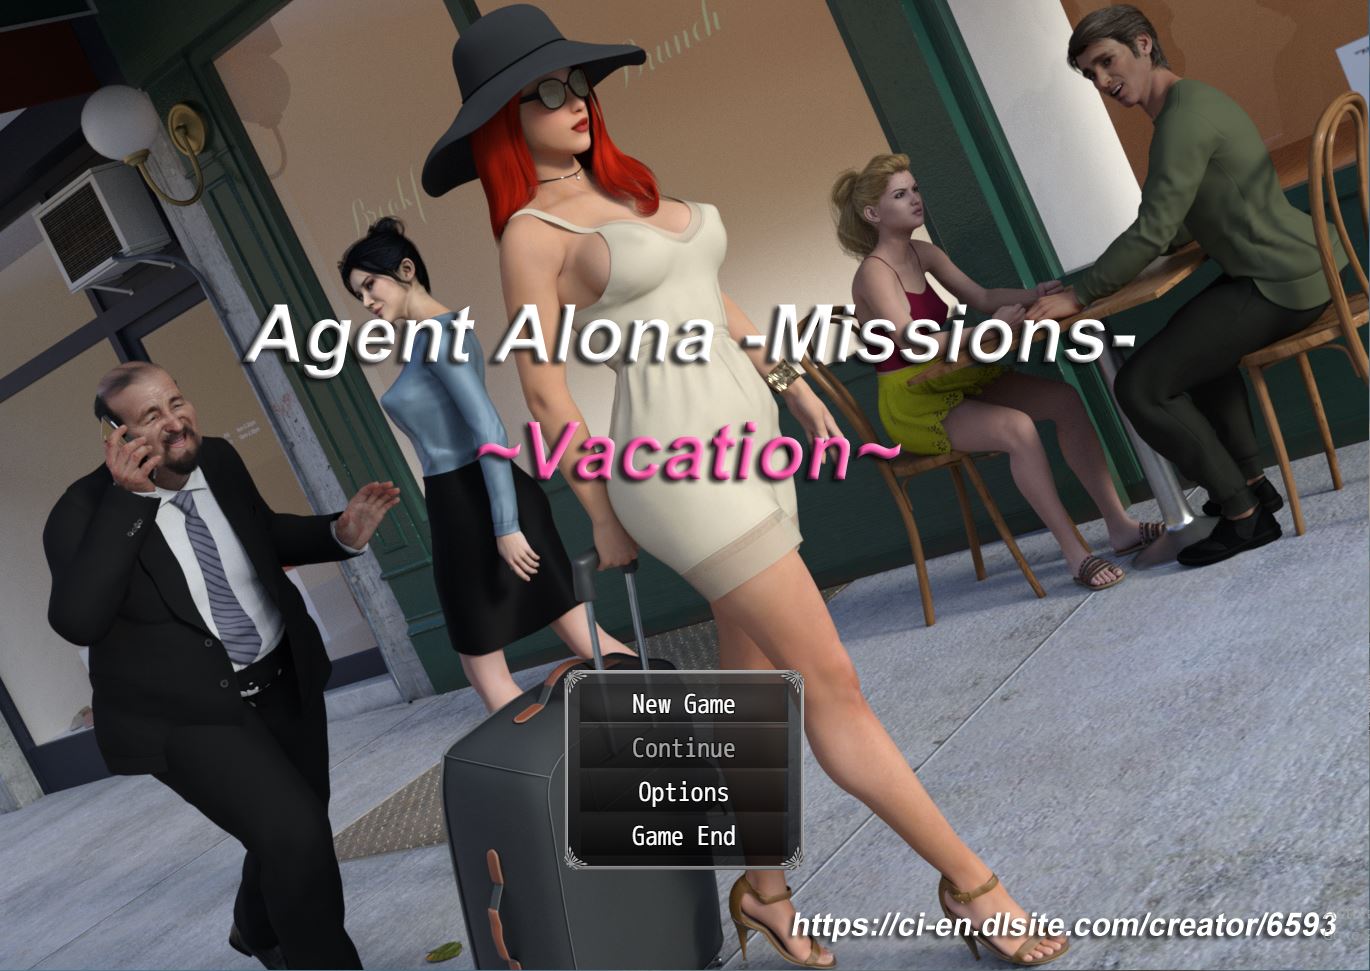 1370px x 971px - Adultgamesworld: Free Porn Games & Sex Games Â» Agent Alona Missions â€“  Vacation â€“ New Uncensored Edition (Full Game) [Combin Ation]